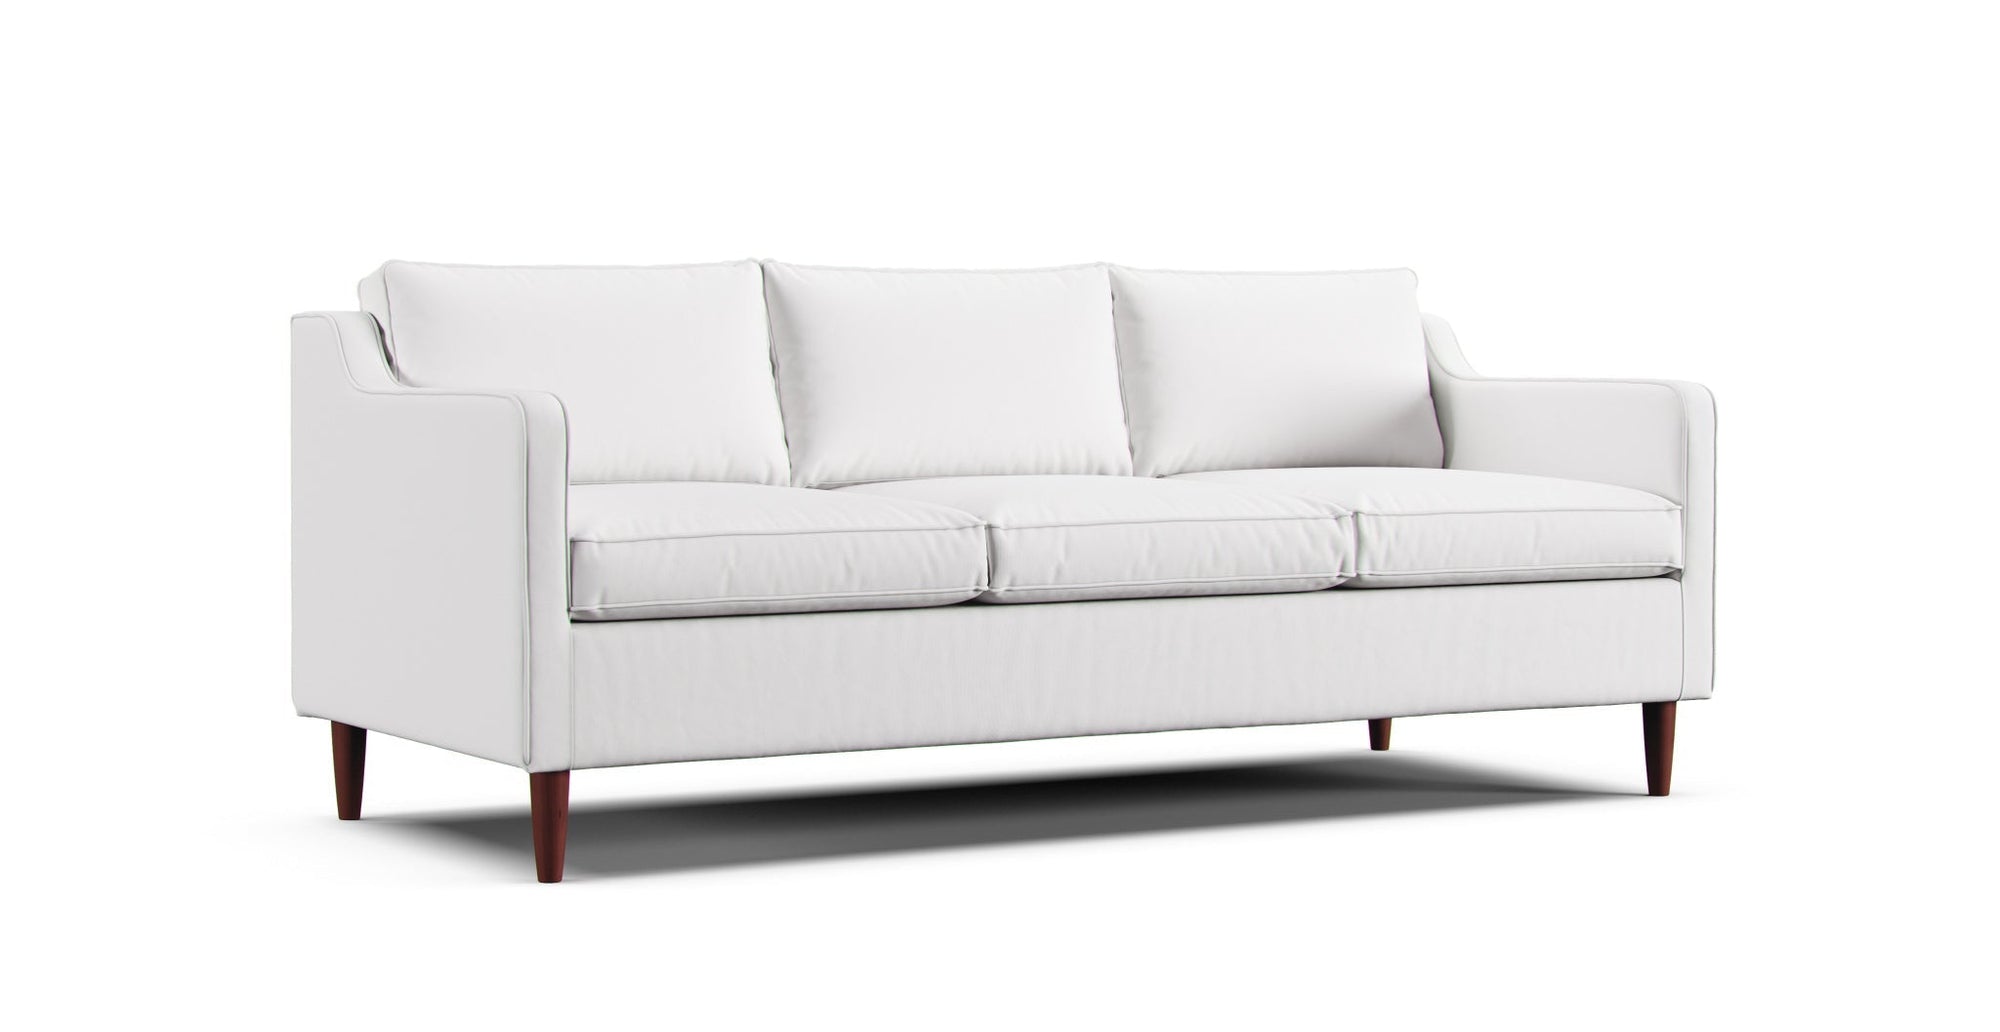 West Elm Hamilton eighty inches sofa featuring machine washable white Cotton Canvas slipcover